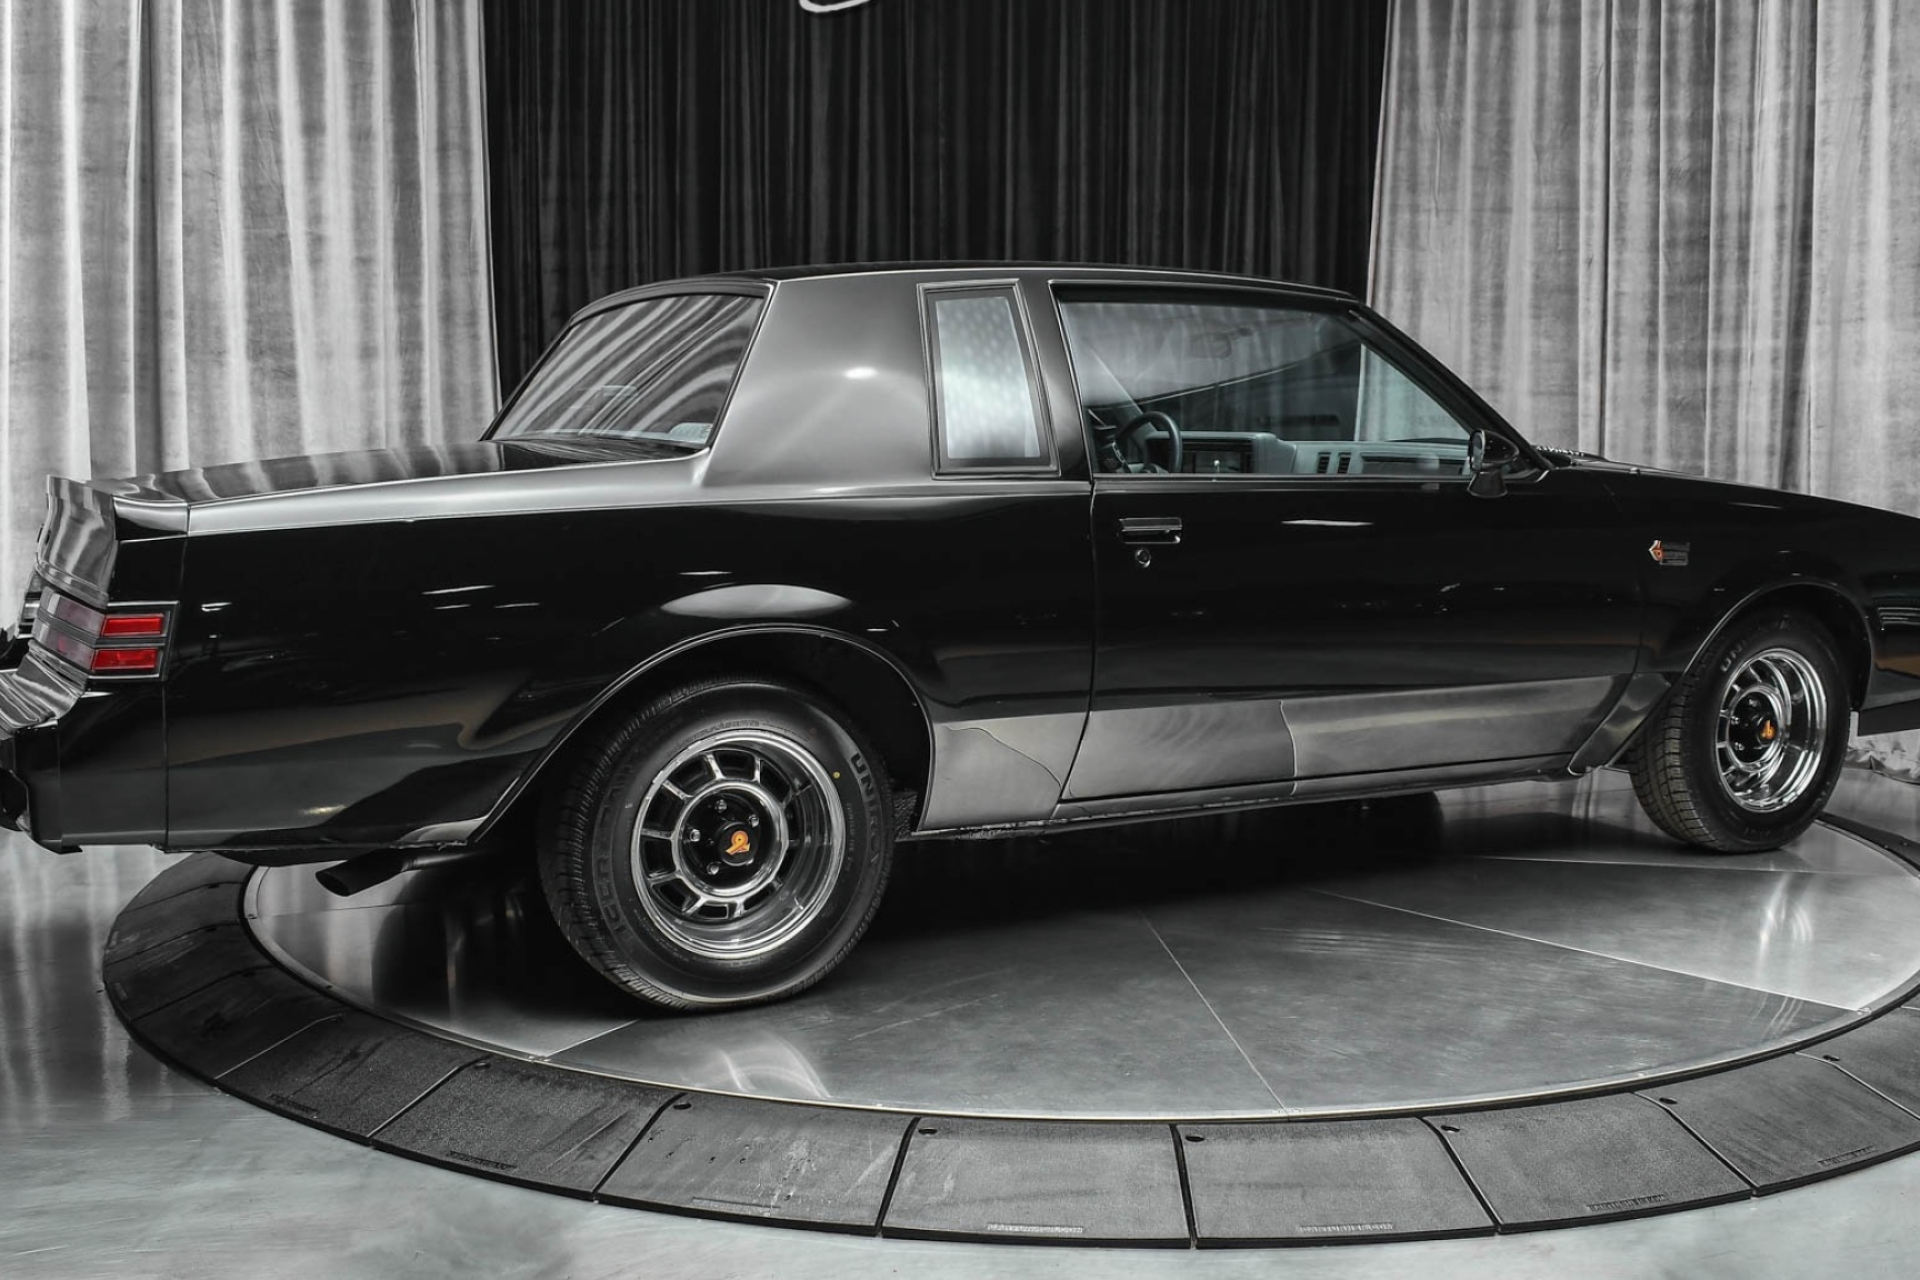 Buick Regal Grand National Turbo, Low miles, Special pricing, Chicago Motor Cars, 1920x1280 HD Desktop